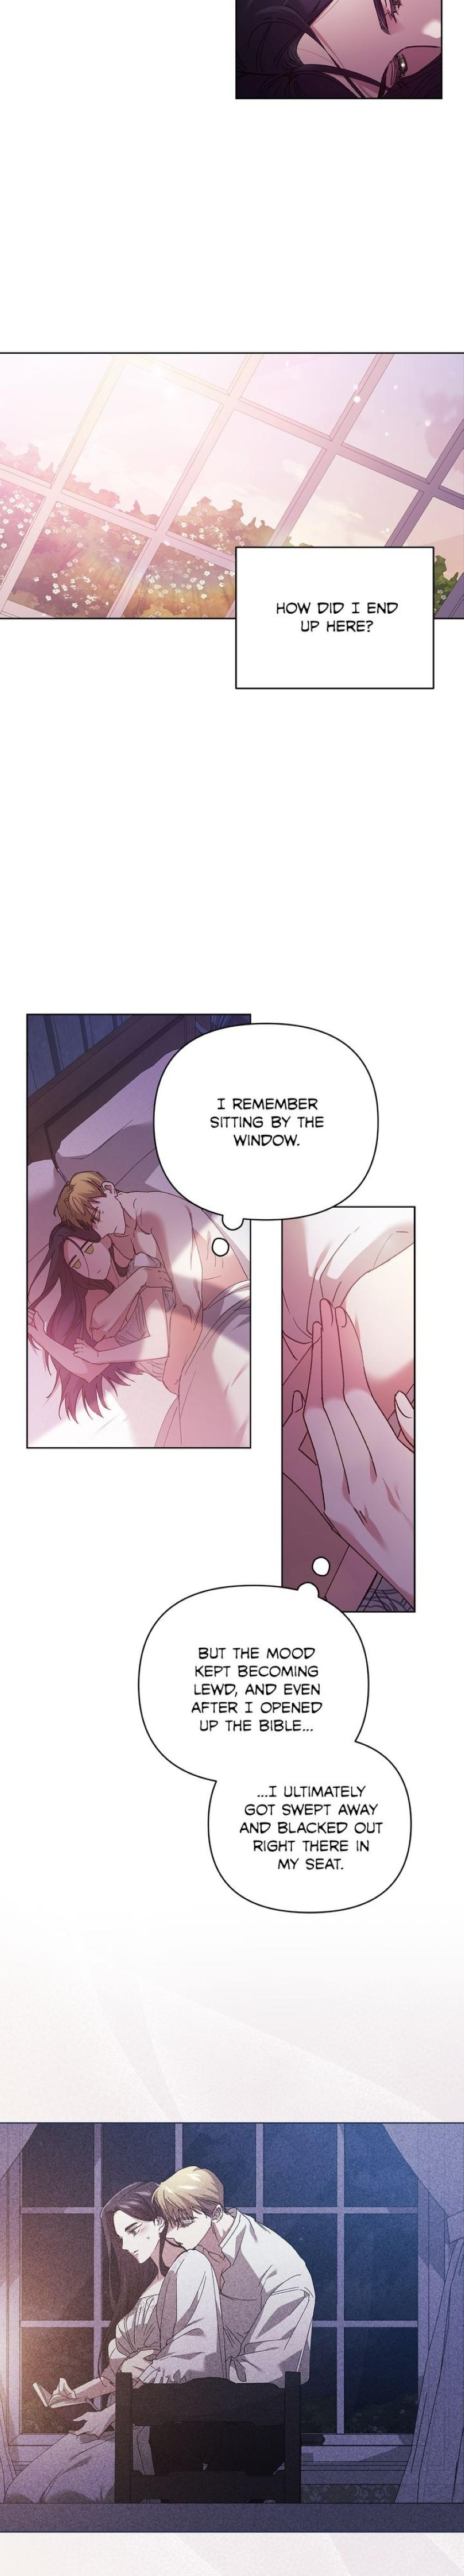 The broken Ring this marriage will fail anyway Manga. Манхва broken Ring this marriage. Manhwa broken Ring. This marriage is bound to fail anyway manhwa. This marriage is bound to fail